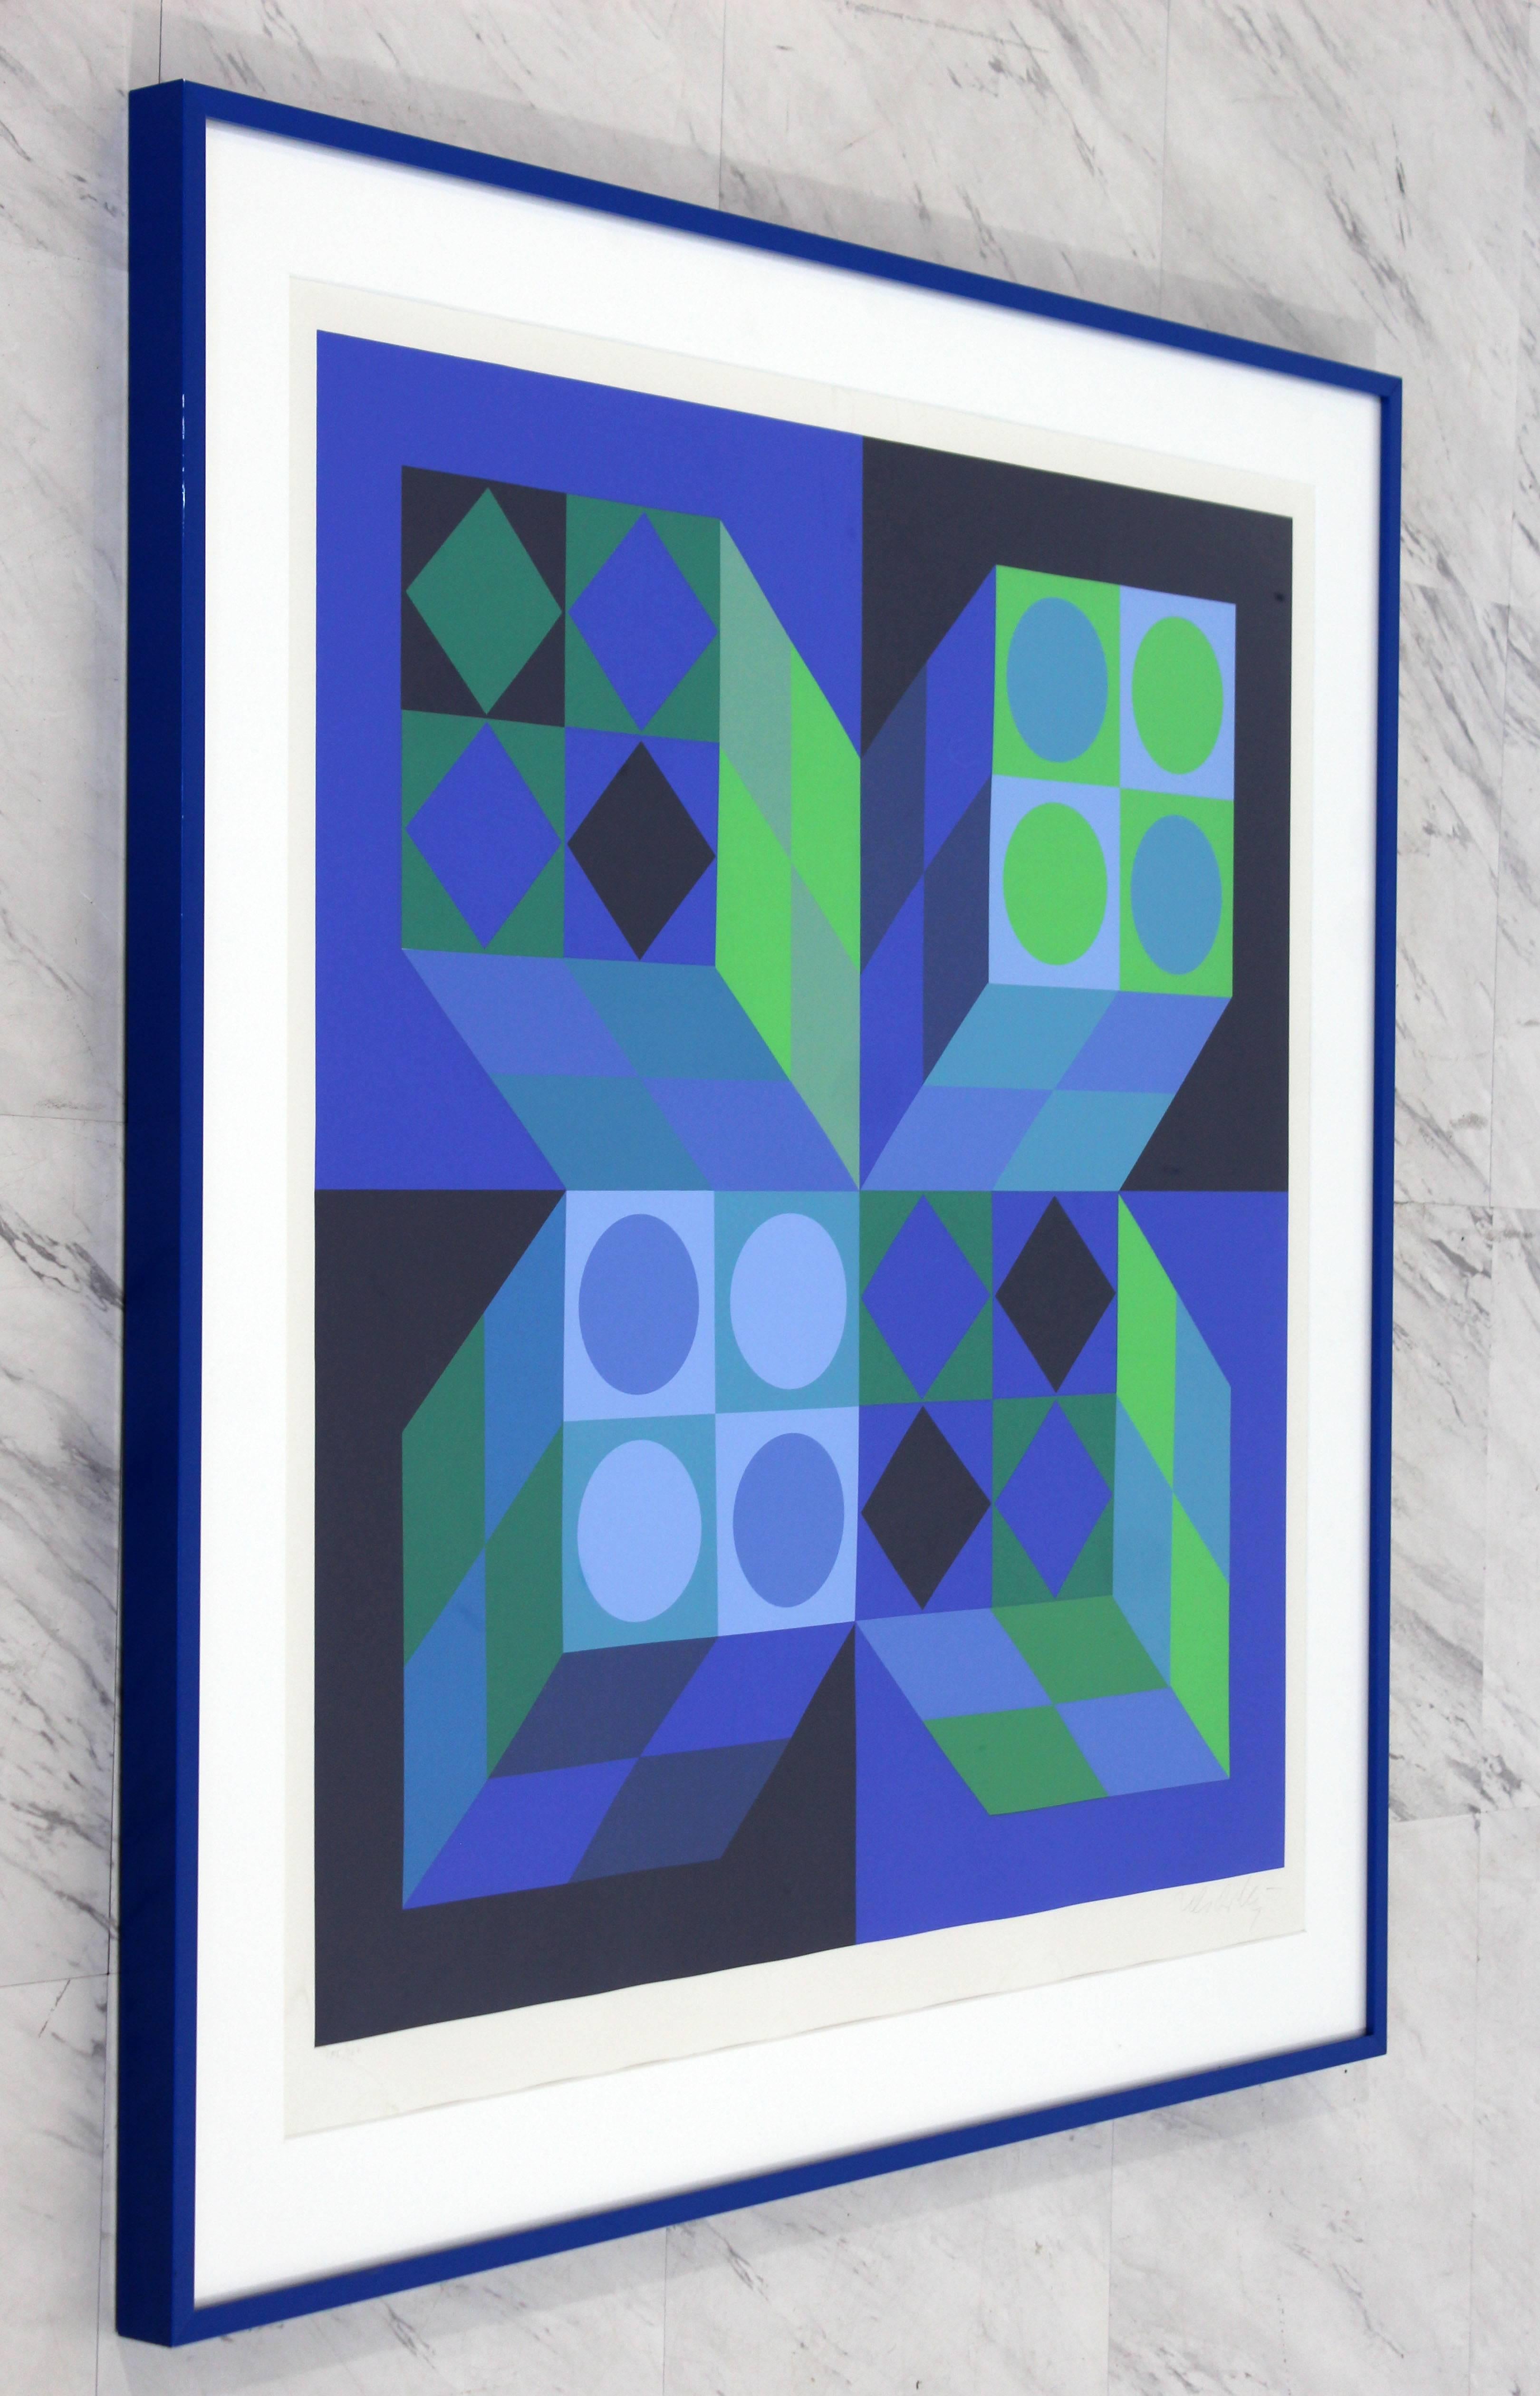 For your consideration is an Op Art lithograph print by Victor Vasarely, signed and numbered 155/262. In excellent condition. The dimensions of the frame are 31.5